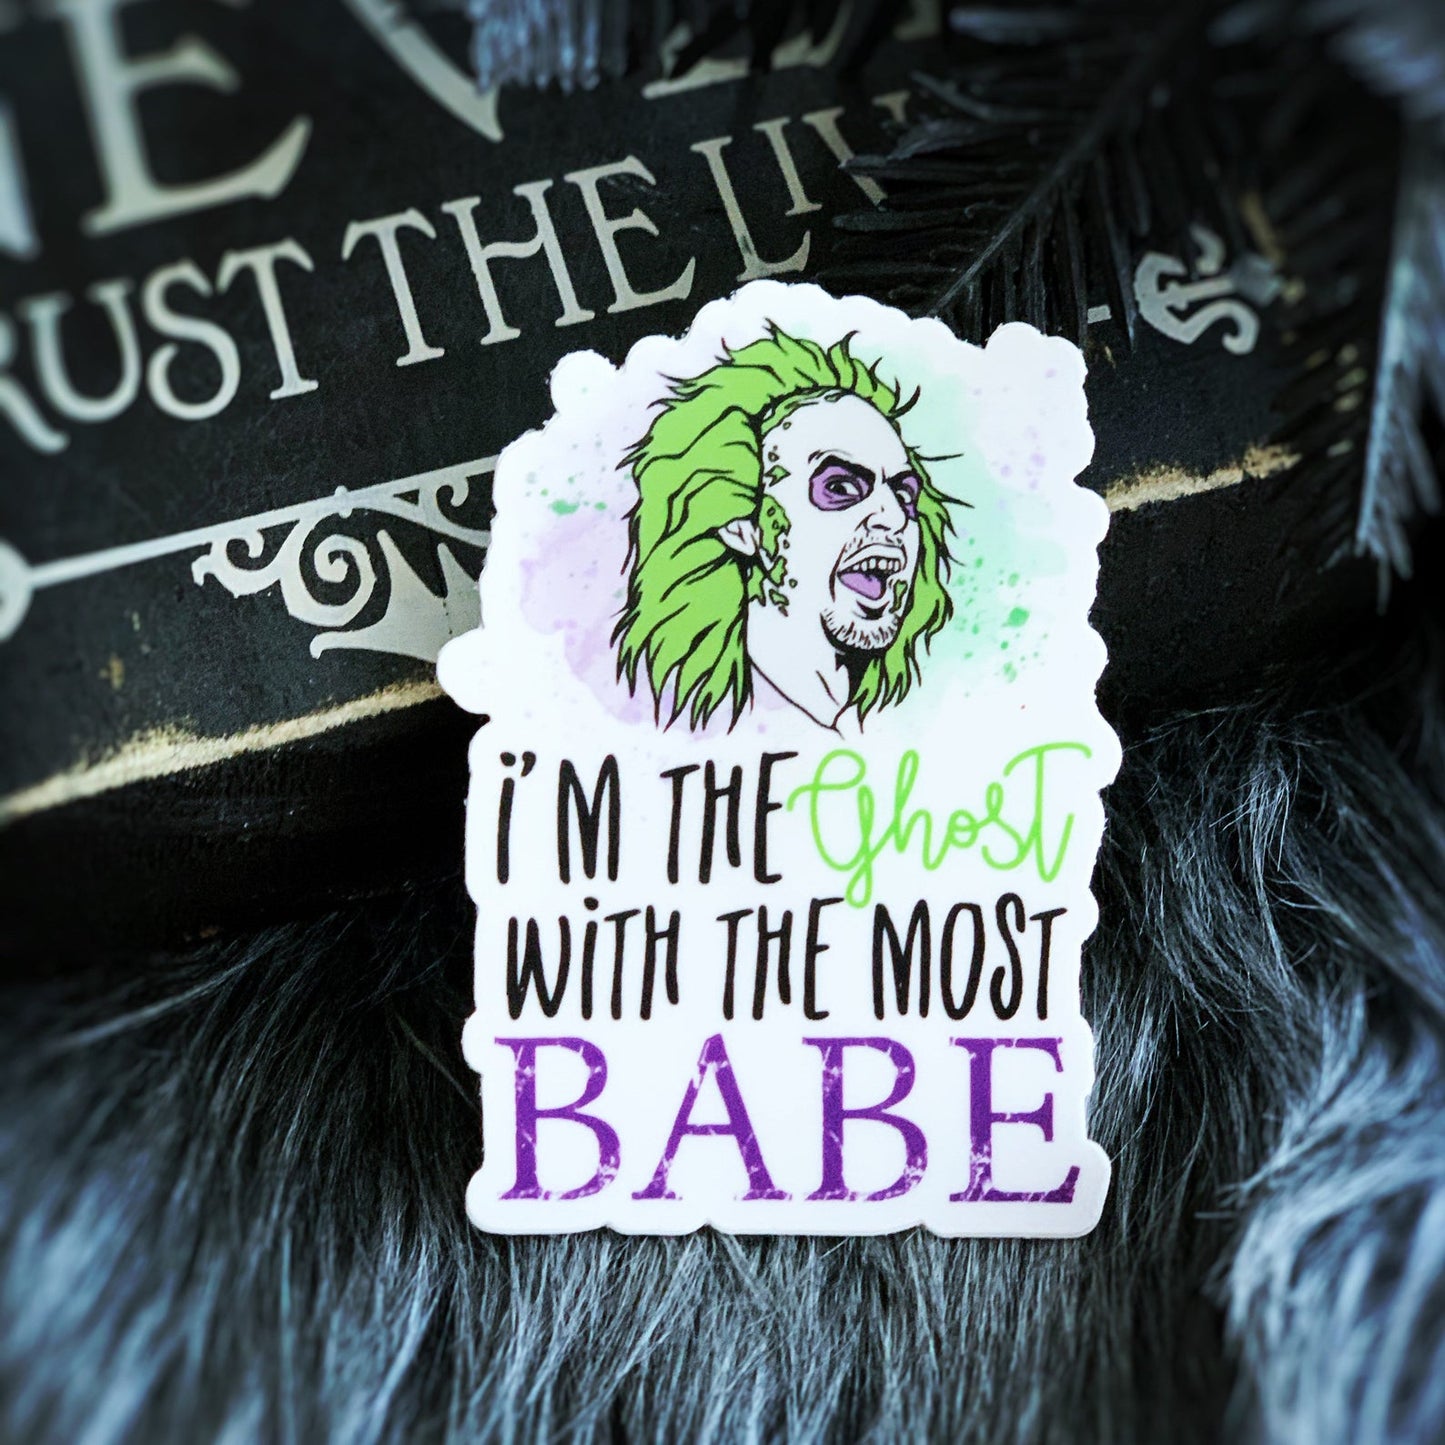 Beetlejuice Ghost With the Most Babe Vinyl Decal laptop Waterbottle Sticker